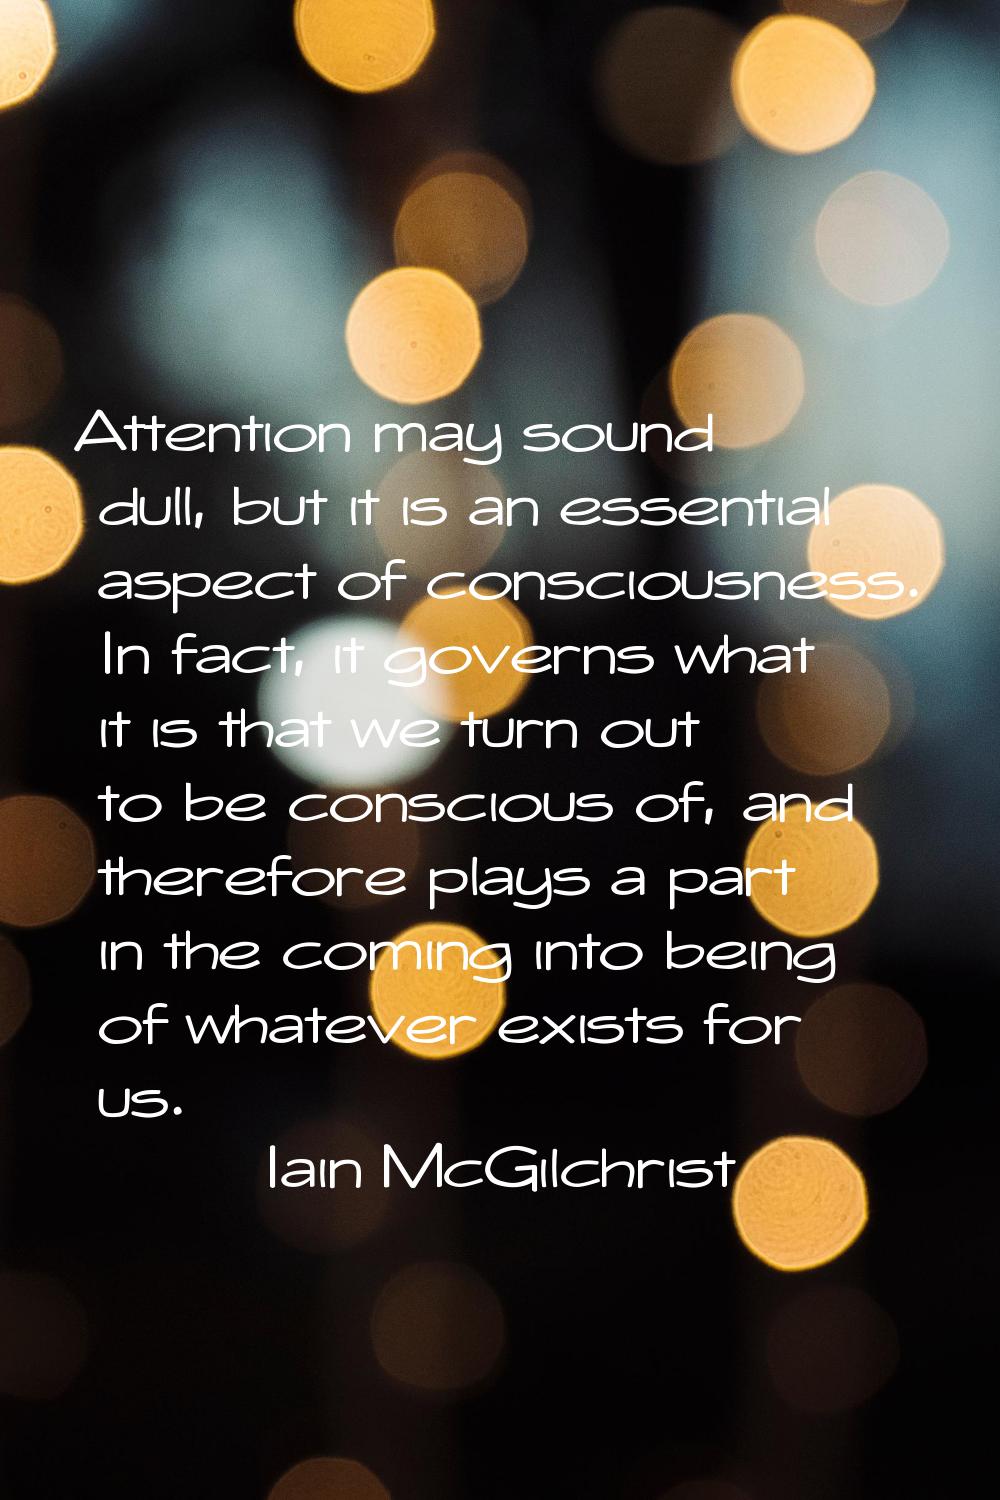 Attention may sound dull, but it is an essential aspect of consciousness. In fact, it governs what 